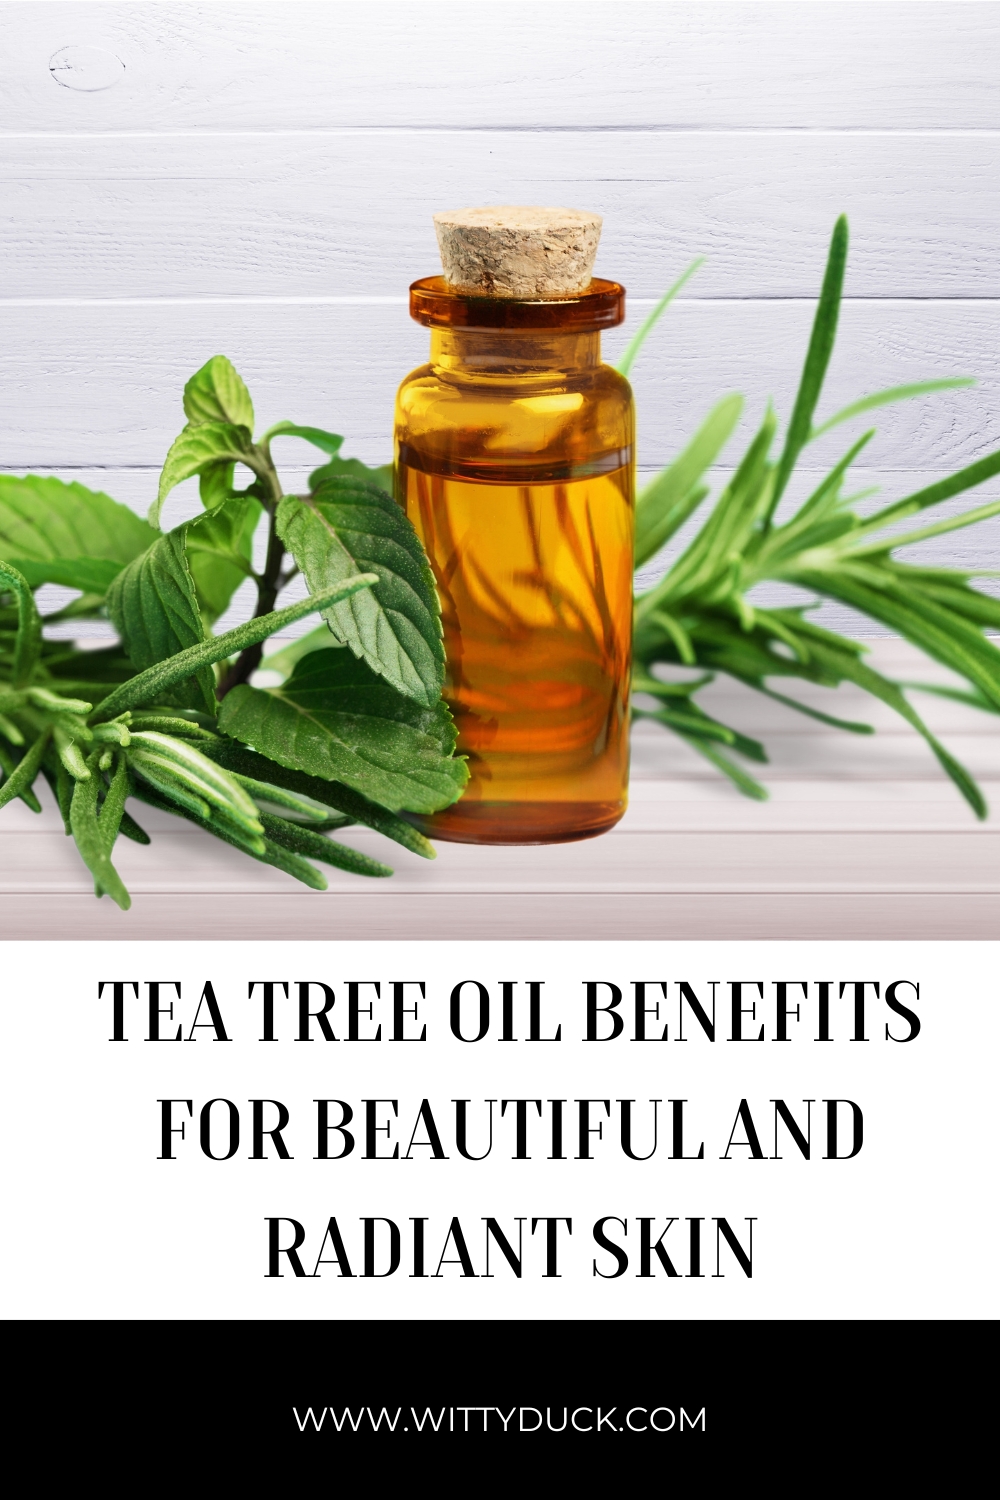 Tea Tree Oil Benefits For Beautiful and Radiant Skin